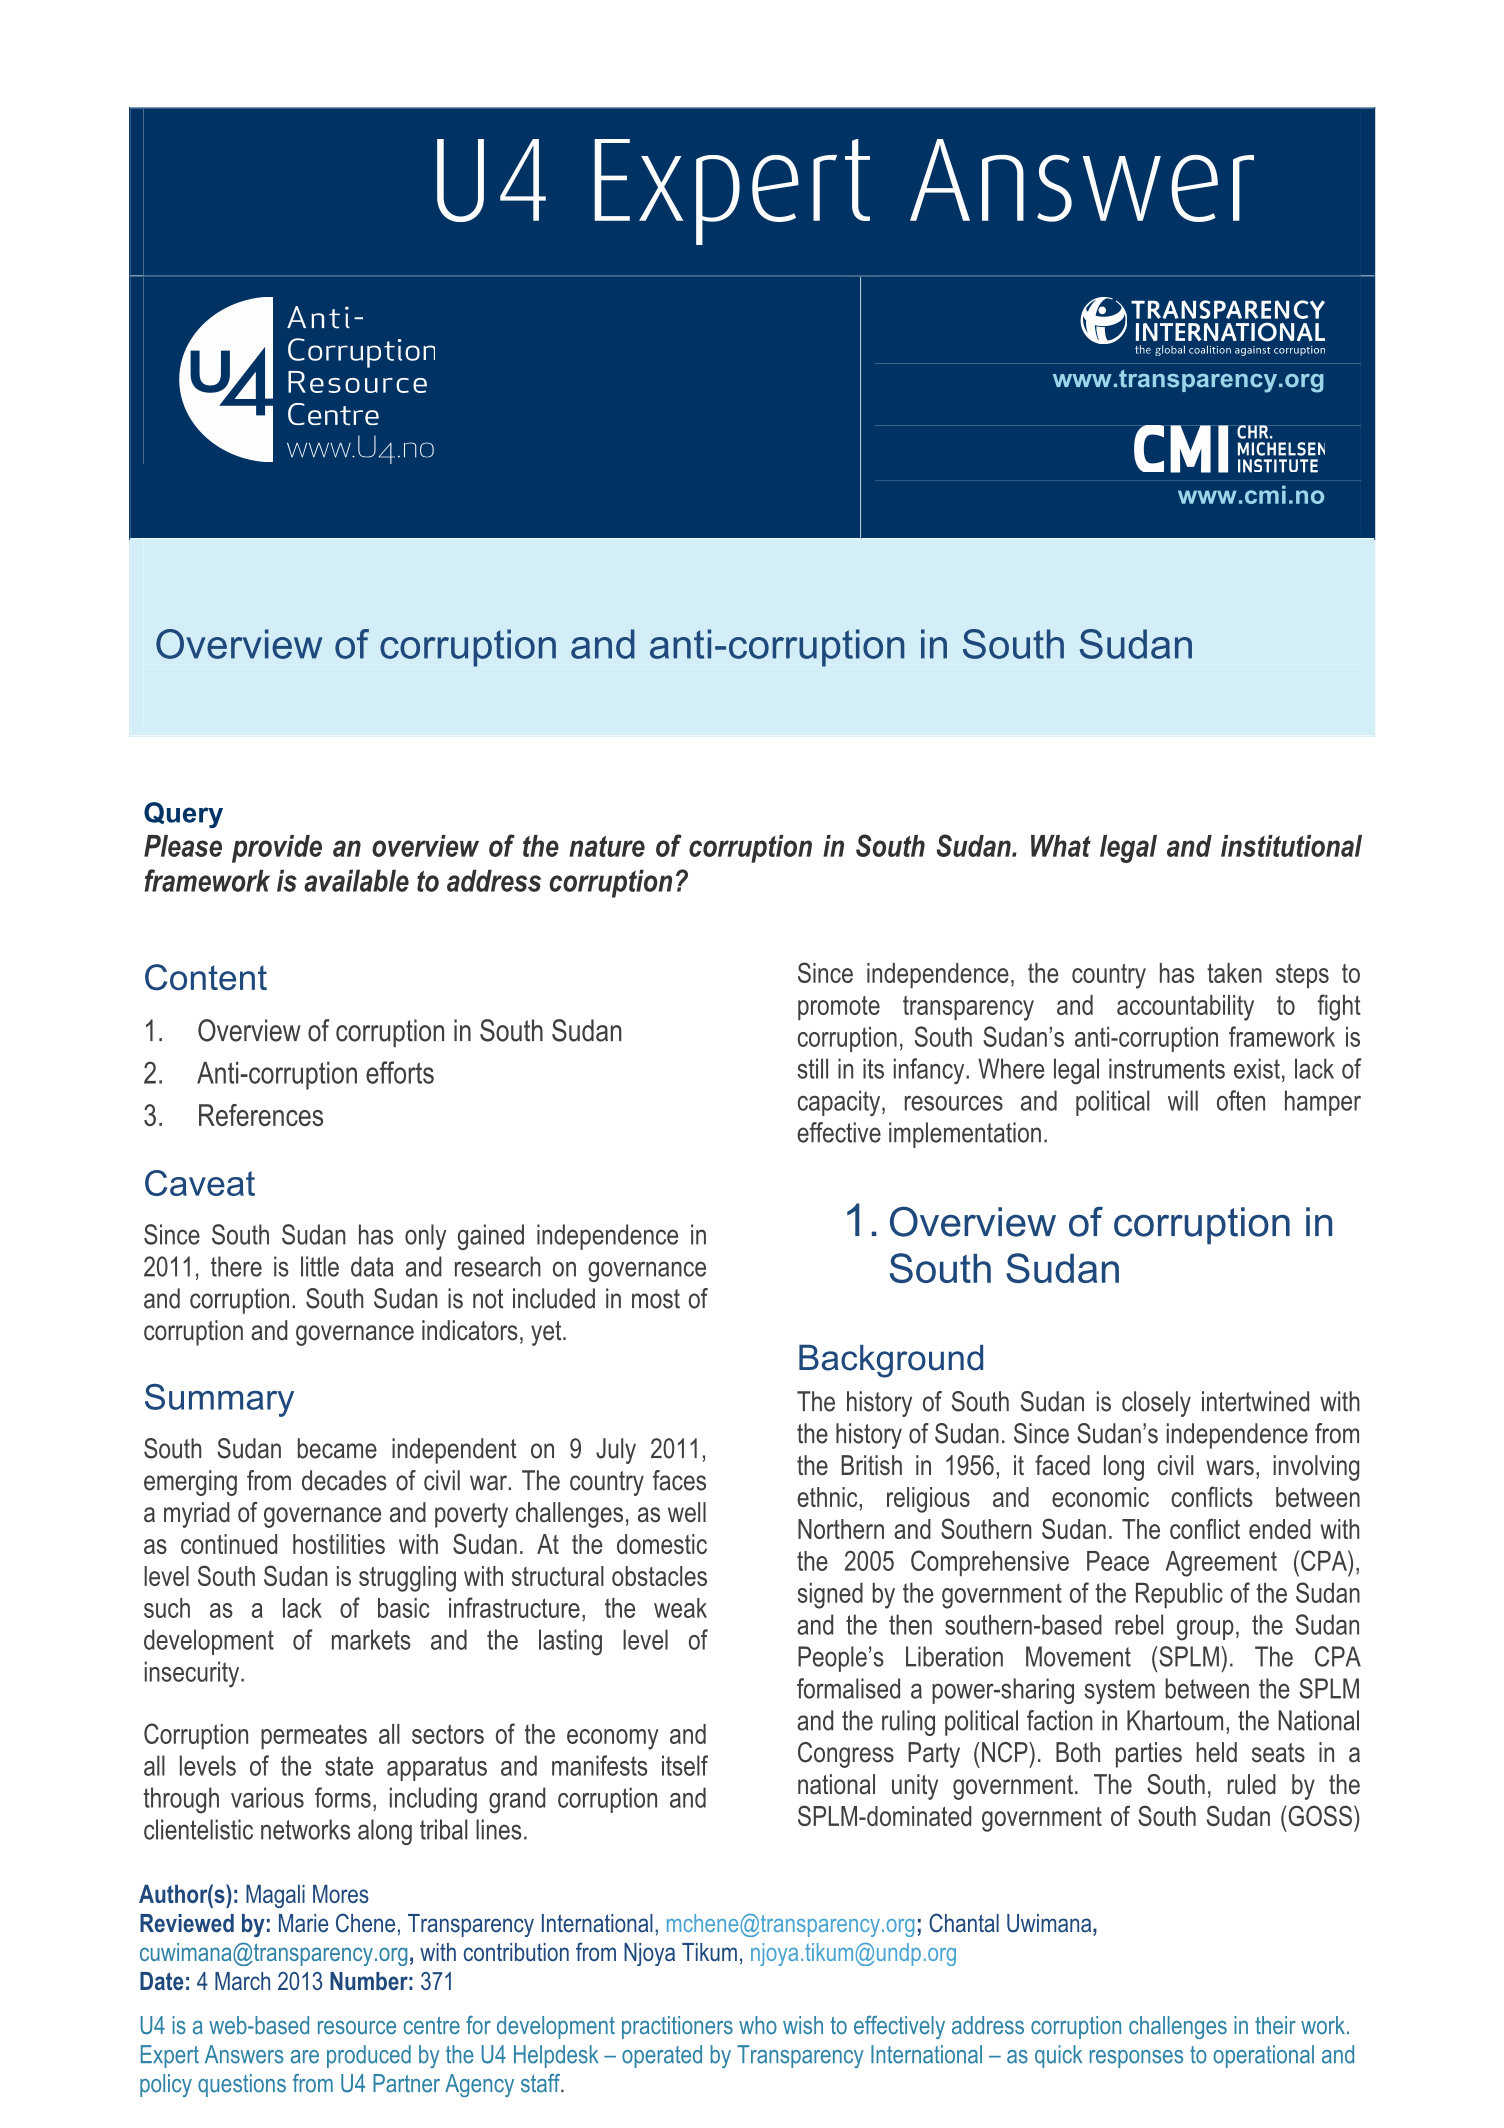 South Sudan: Overview of corruption and anti-corruption